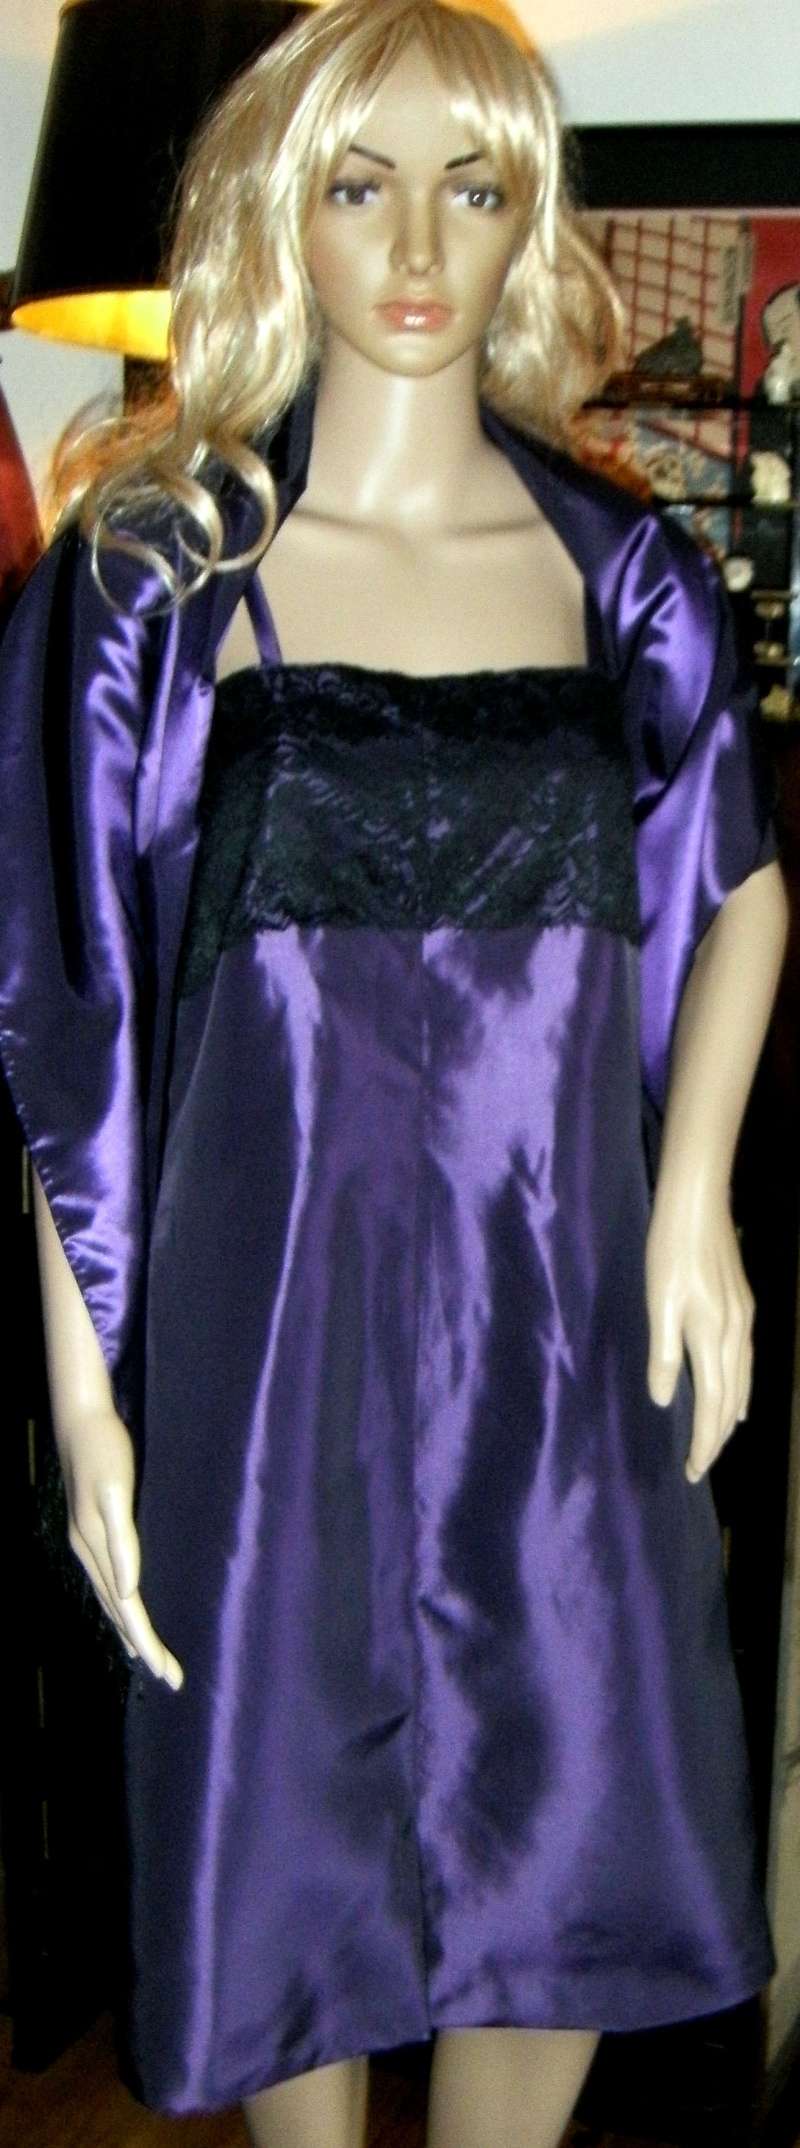 galerie - Galerie couture, broderie, de Lise - Page 14 Robe_e10